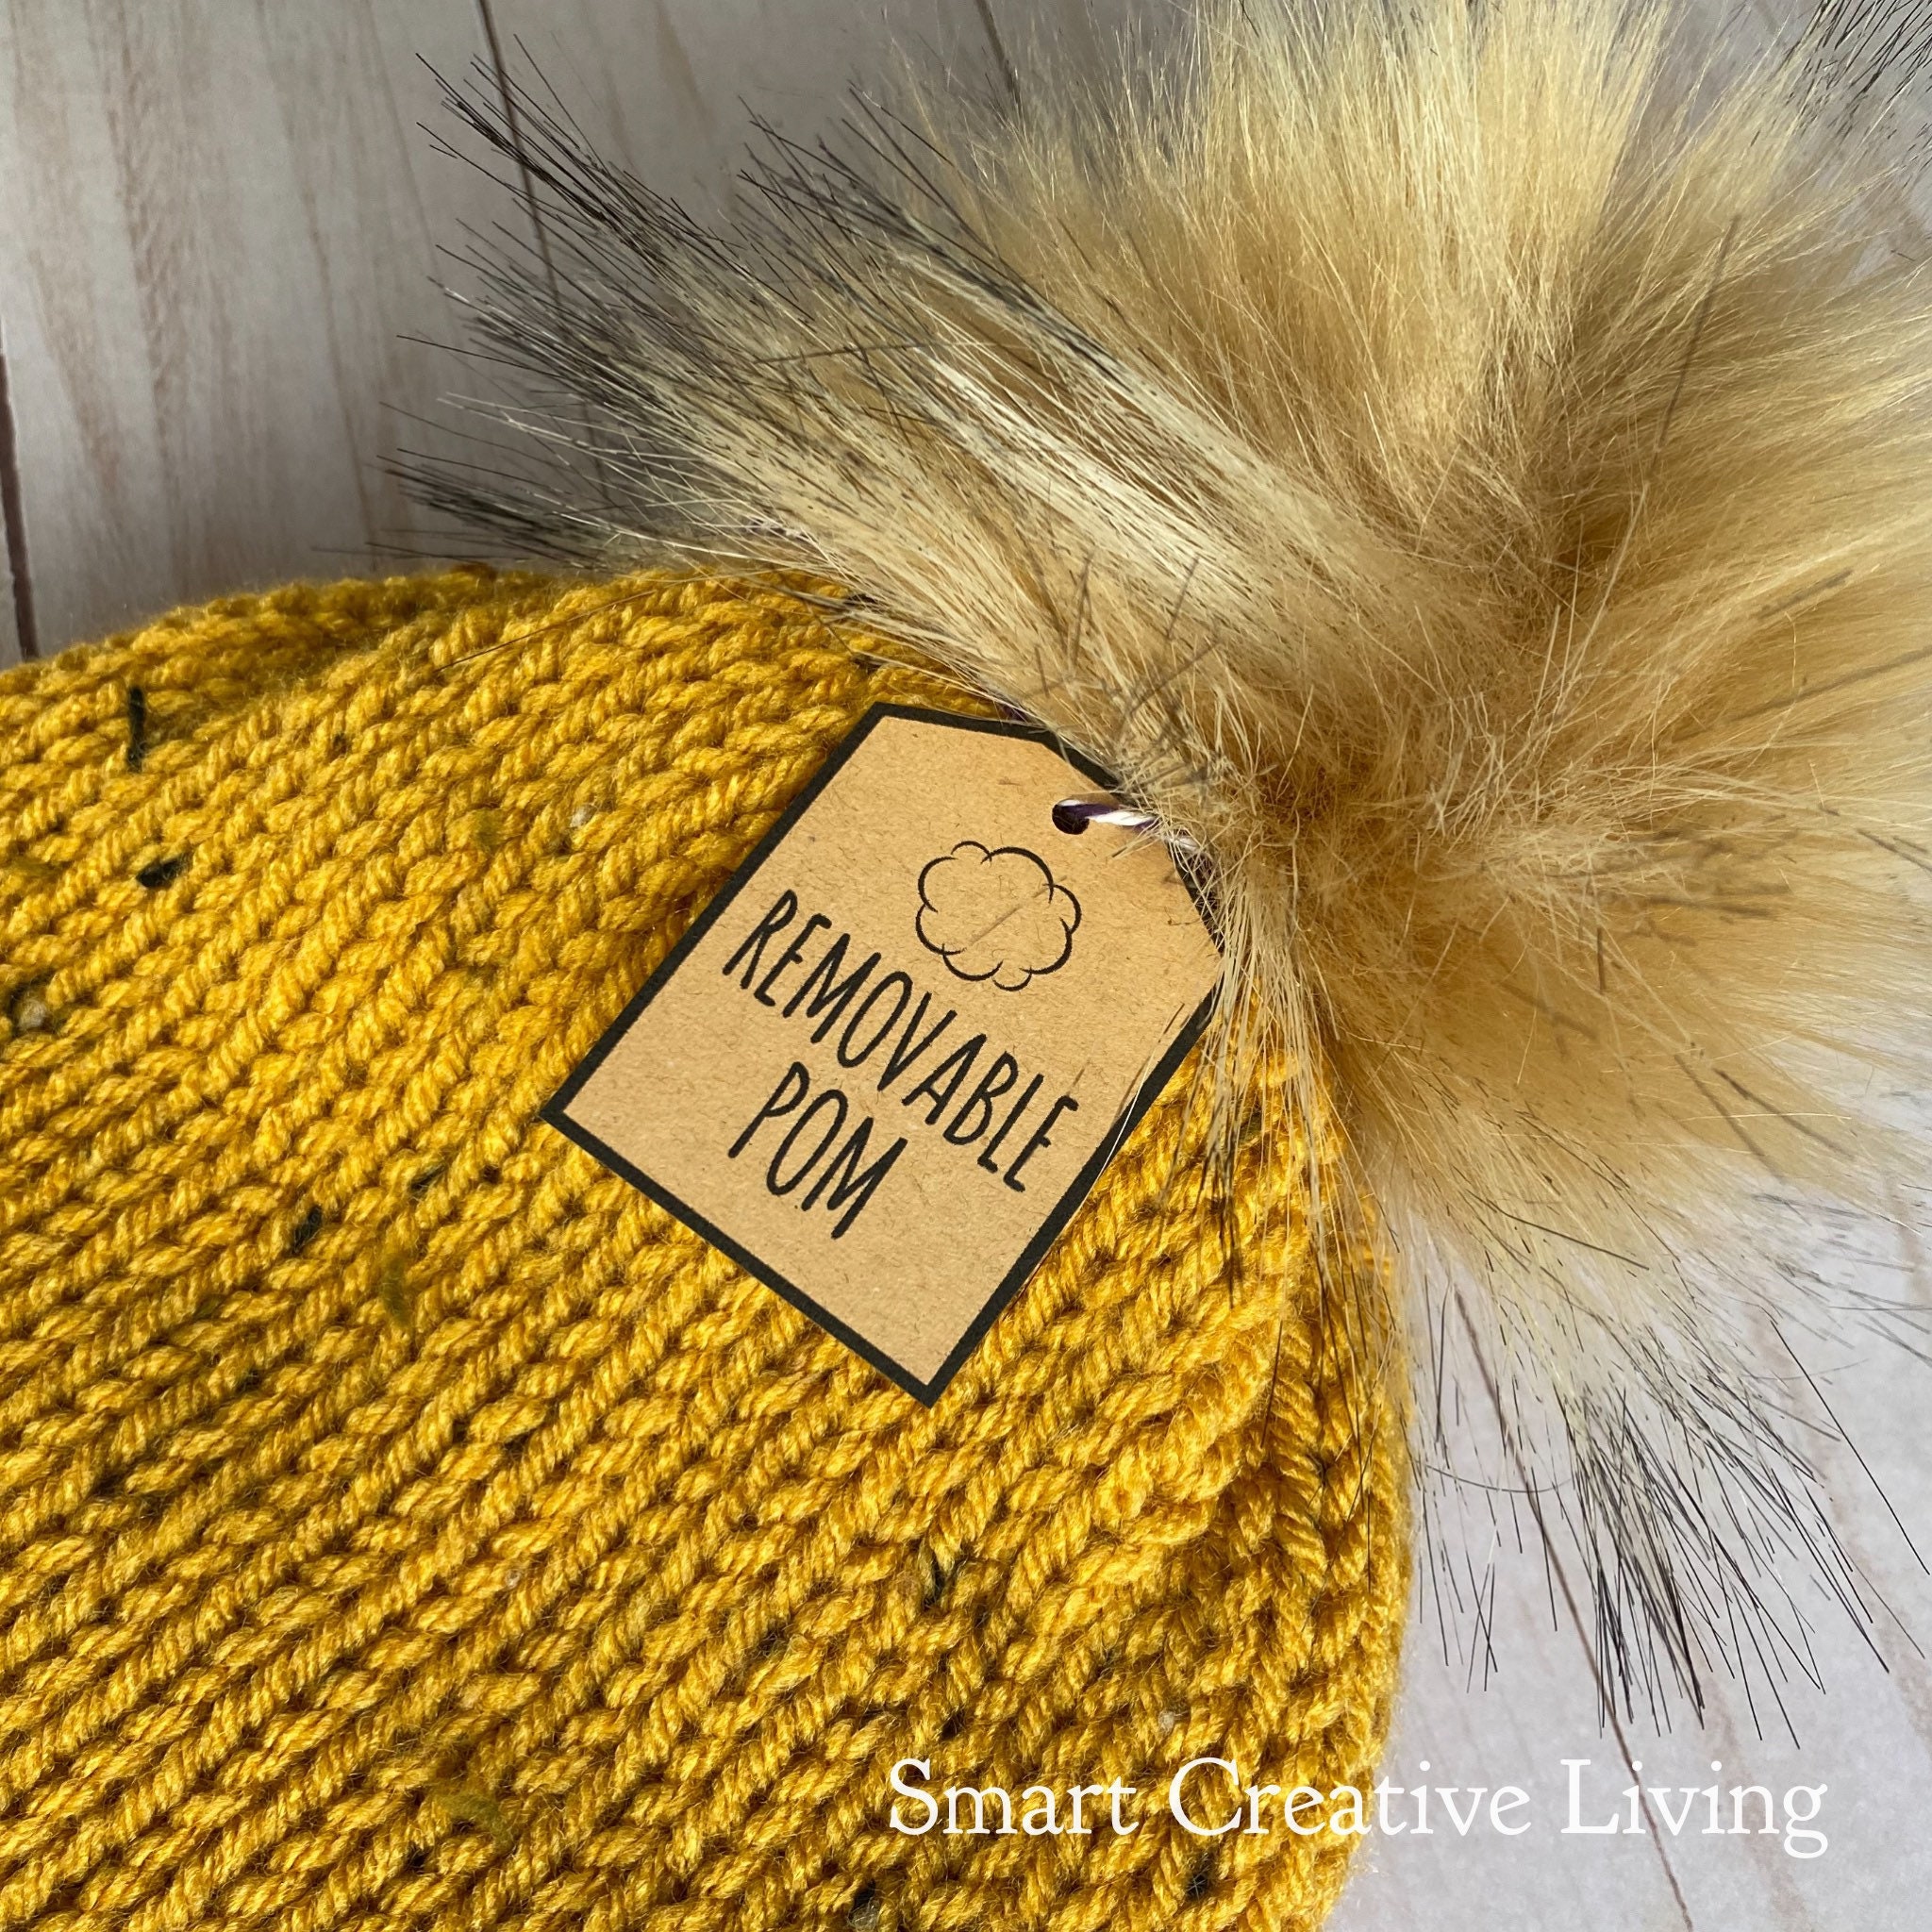 Removable Wooden Pom-pom Buttons for Faux Fur Pom-poms on Handmade